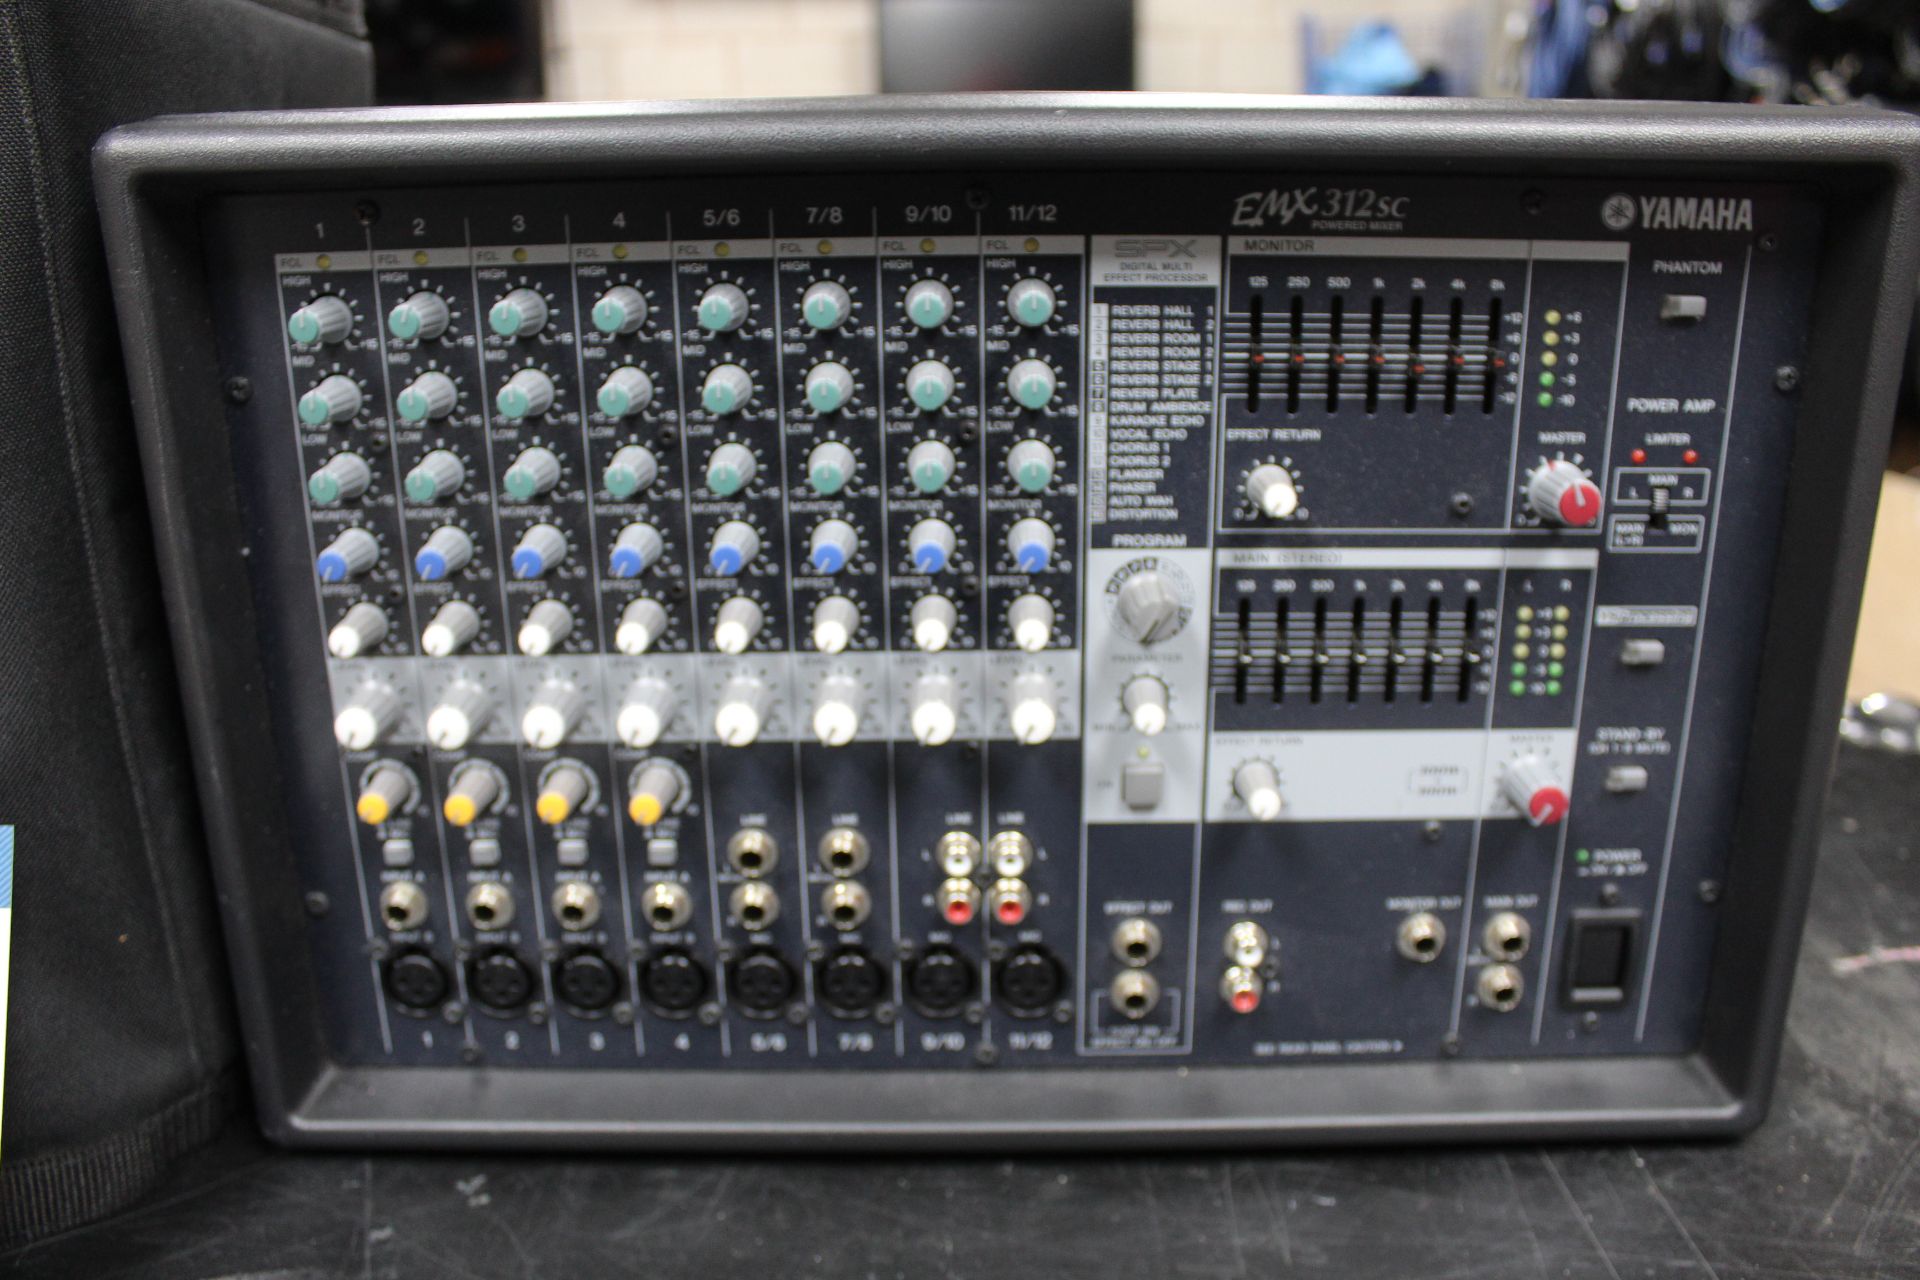 Yamaha EMX312SC 12 channel mixer/amplifier, Serial No. BSCU001017 with 1x IEC, 2x speaker cables - Image 2 of 4